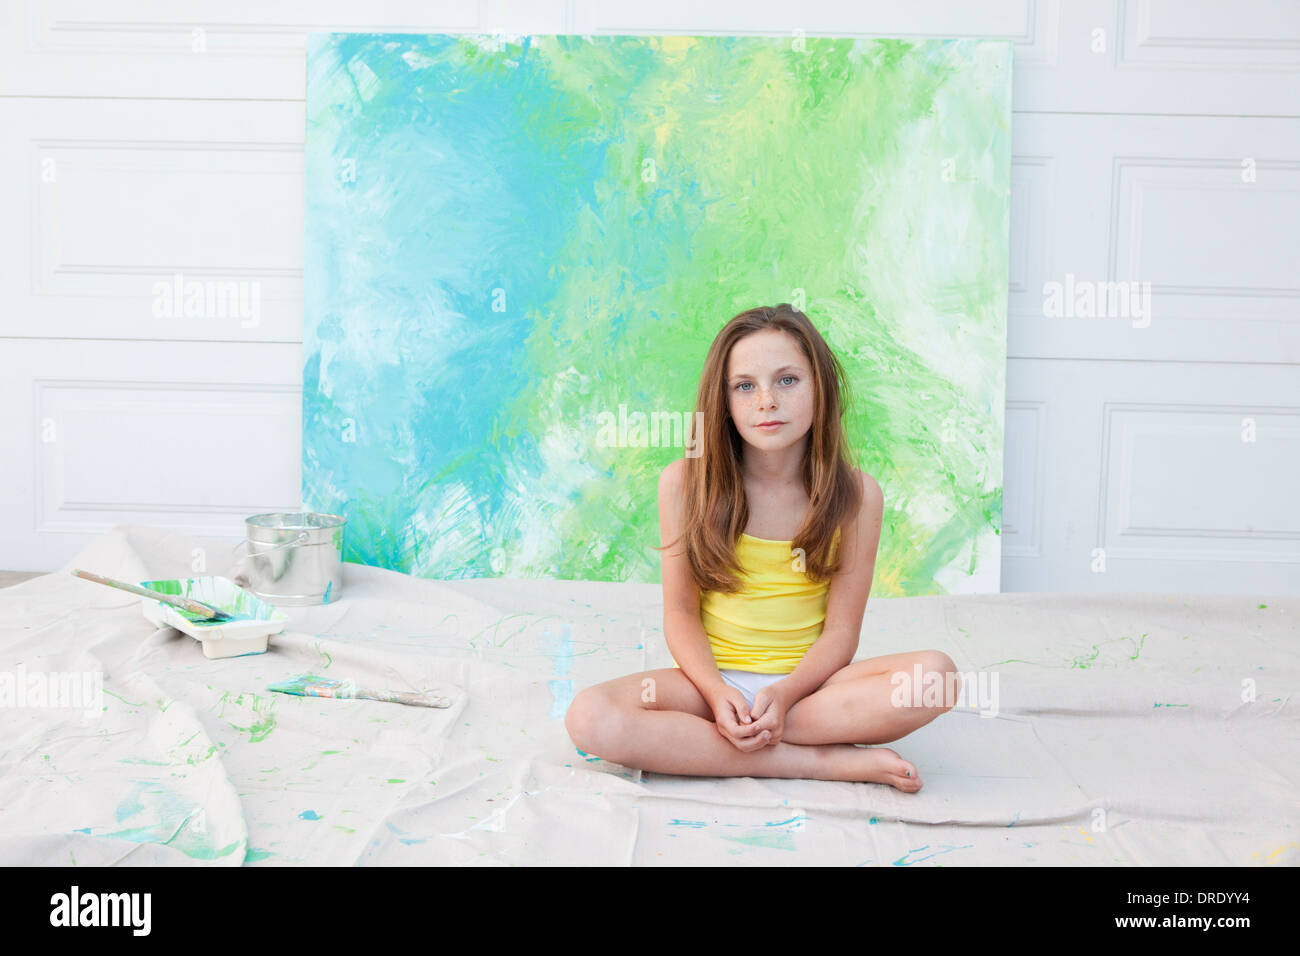 Young girl sitting in front of colorful blue and green painting Stock Photo